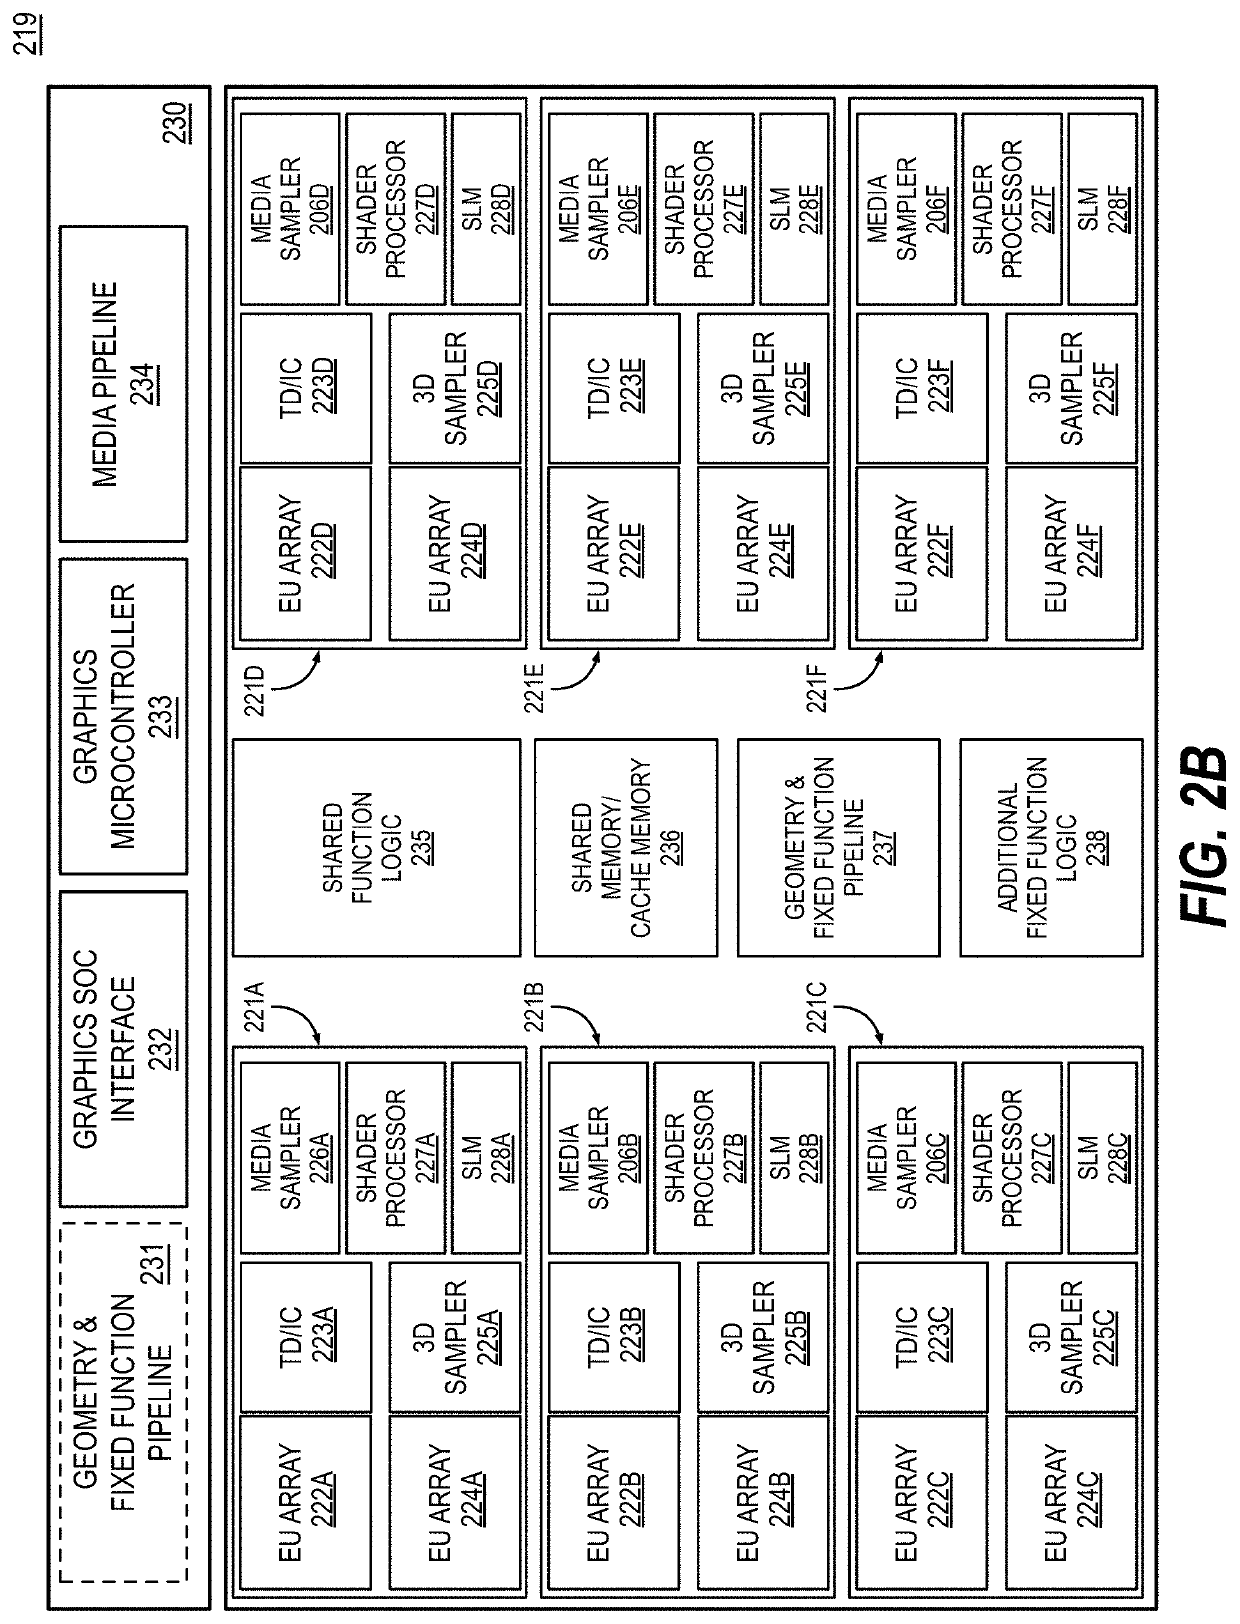 Apparatus and method for performing box queries in ray traversal hardware